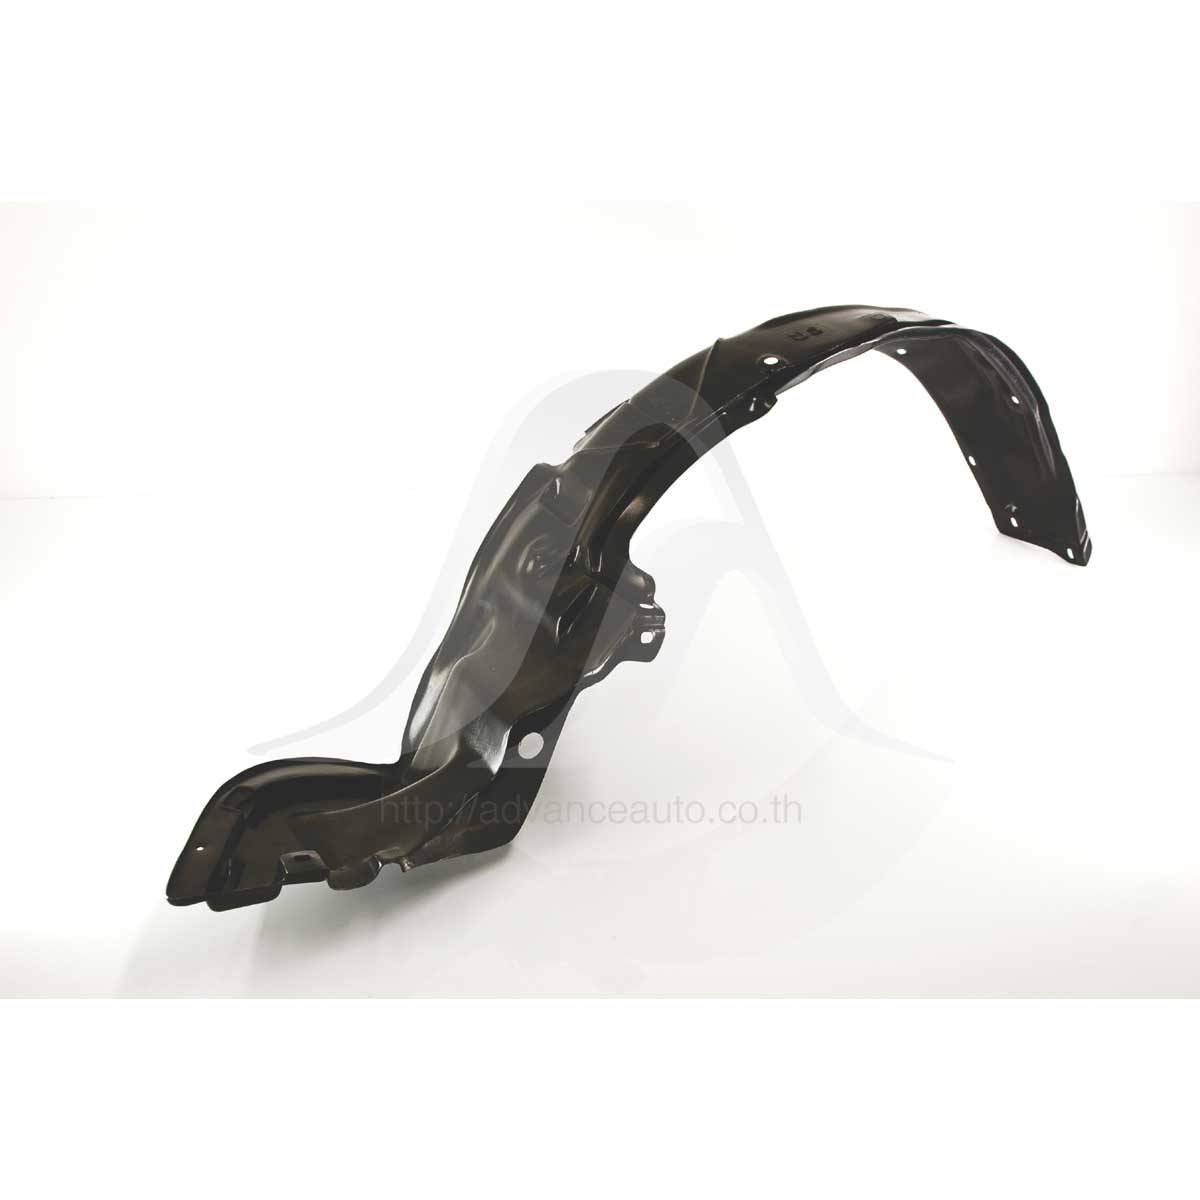 Aftermarket body parts for honda civic #4